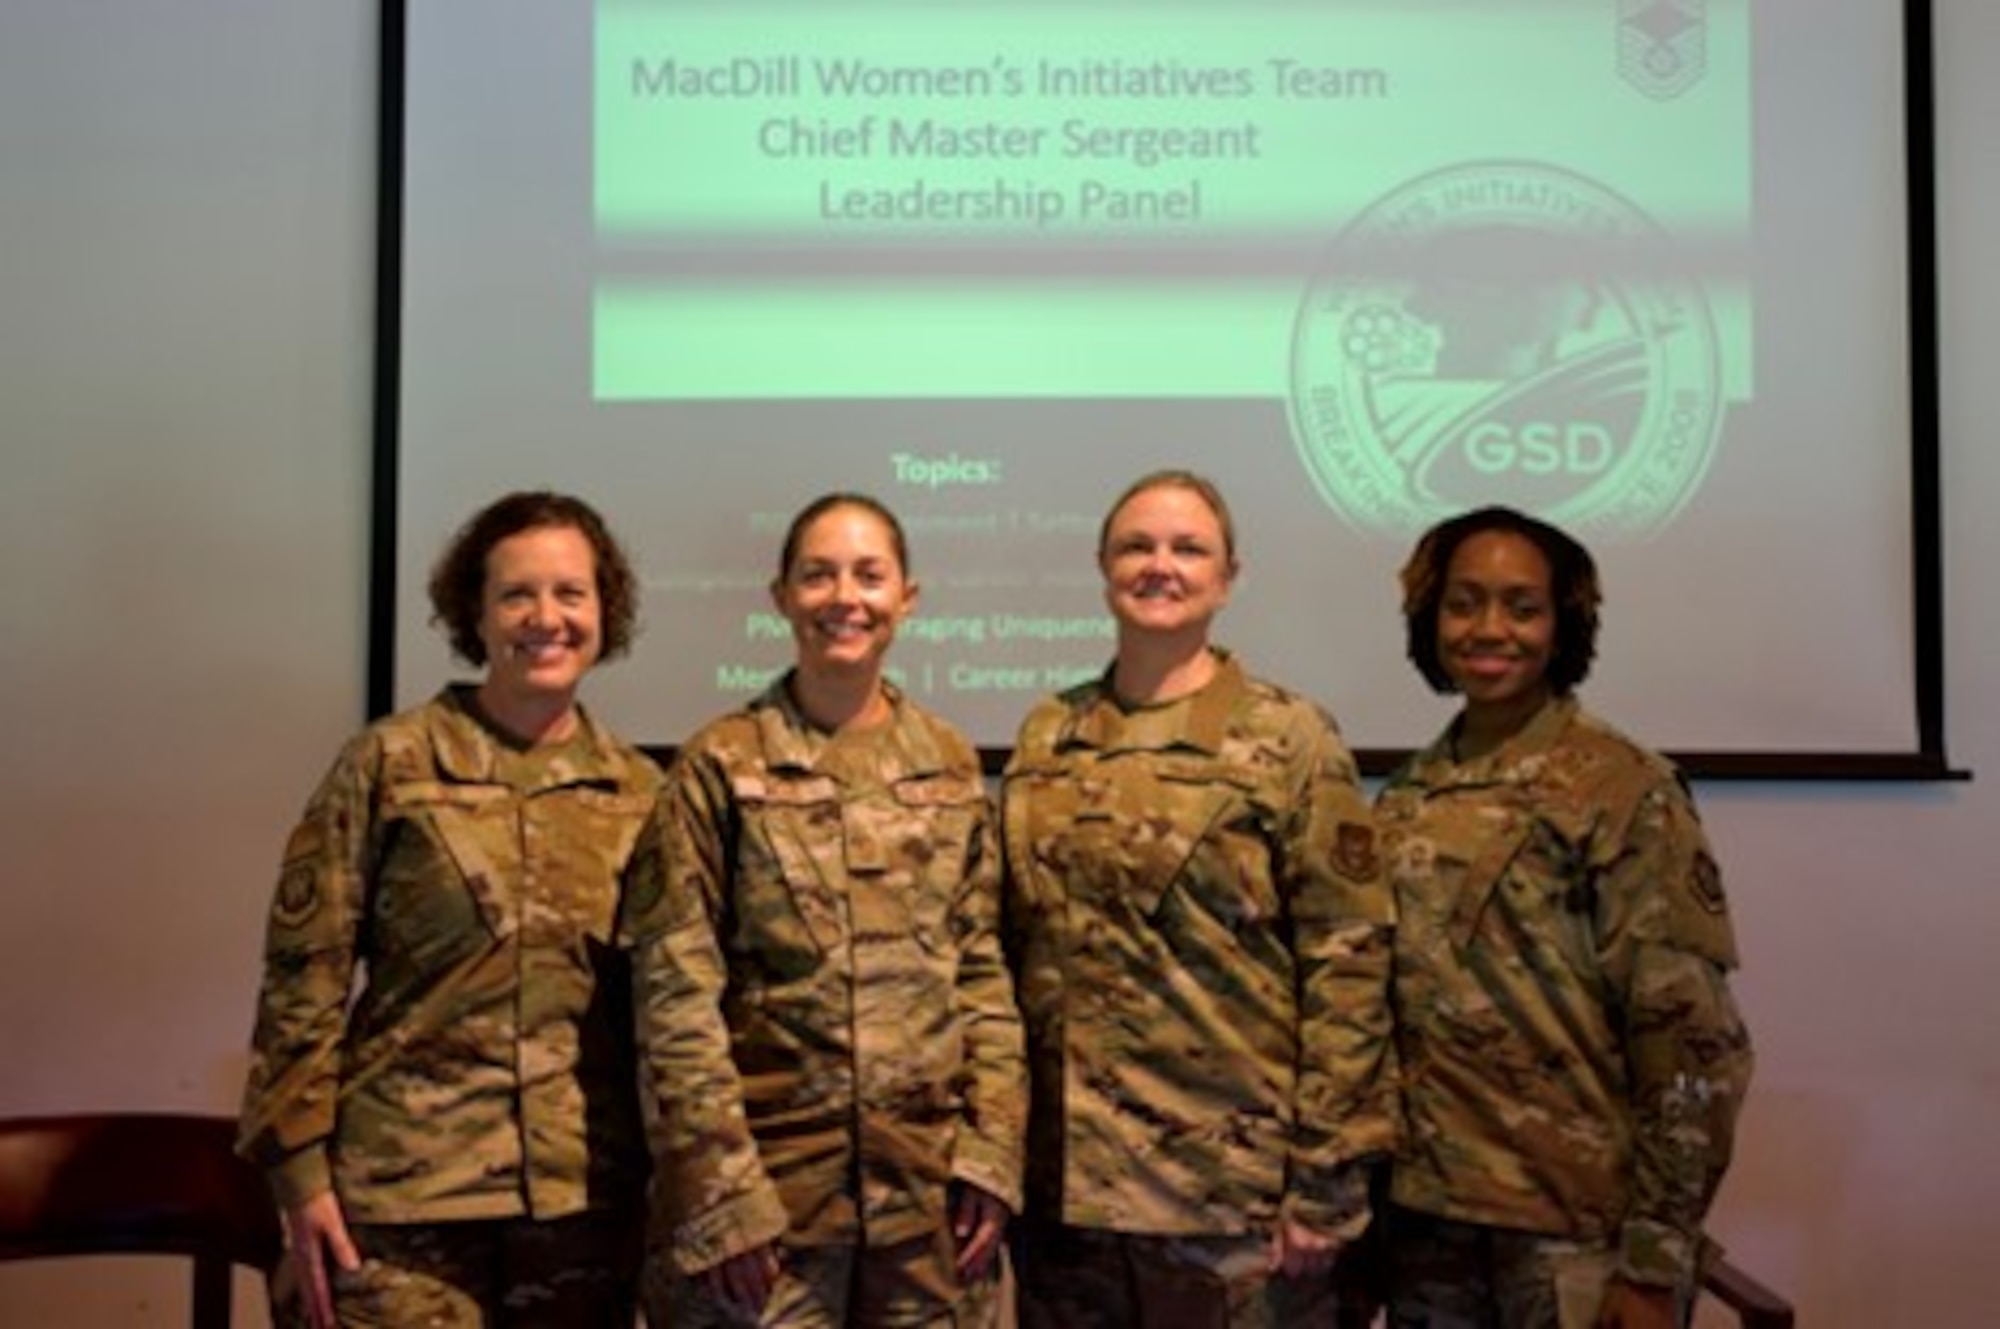 .From left, Chief Master Sgt. Shae D. Gee, 6th Air Refueling Wing command chief, Chief Master Sgt. Erin Willis, 927th Maintenance Group superintendent, Chief Master Sgt. Kelly Kruger, 927th ARW command chief, and Chief Master Sgt. Catrell Wilson, 6th Operations Group superintendent, were the panelists for the women’s leadership panel held at Bay Palms Golf Course restaurant, MacDill Air Force Base on Sept. 16, 2022. Topics discussed included the importance of seeking guidance, pillar management, setbacks, family, competitive and flexible career moves, and mental health. (U.S. Air Force Photo by Staff Sgt. Alexis Suarez)